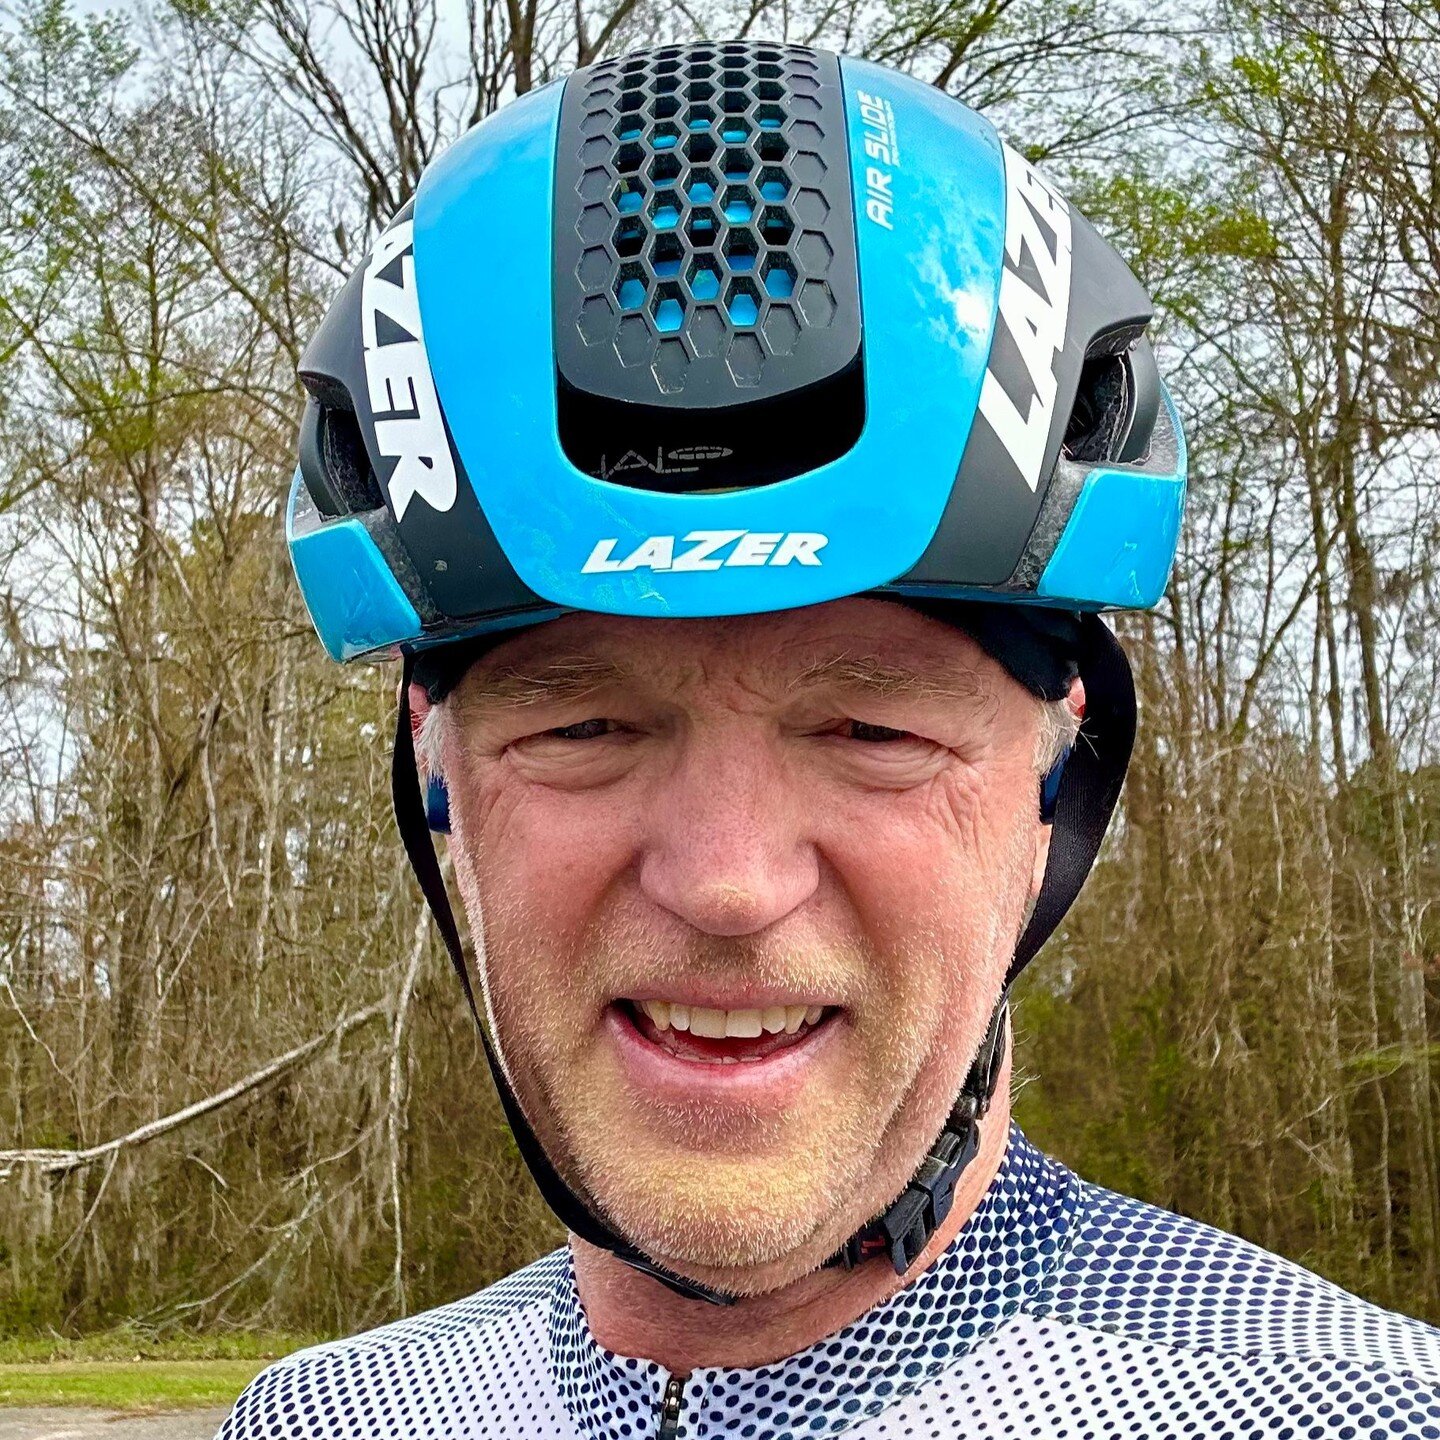 Spring training vibes are in full bloom! 🌼 George Ferris is already gearing up for the Oceanside 70.3 this weekend and Ironman Australia, diving headfirst into the season&mdash;literally! 🚴&zwj;♂️ With pollen as his war paint, he's showing us that 